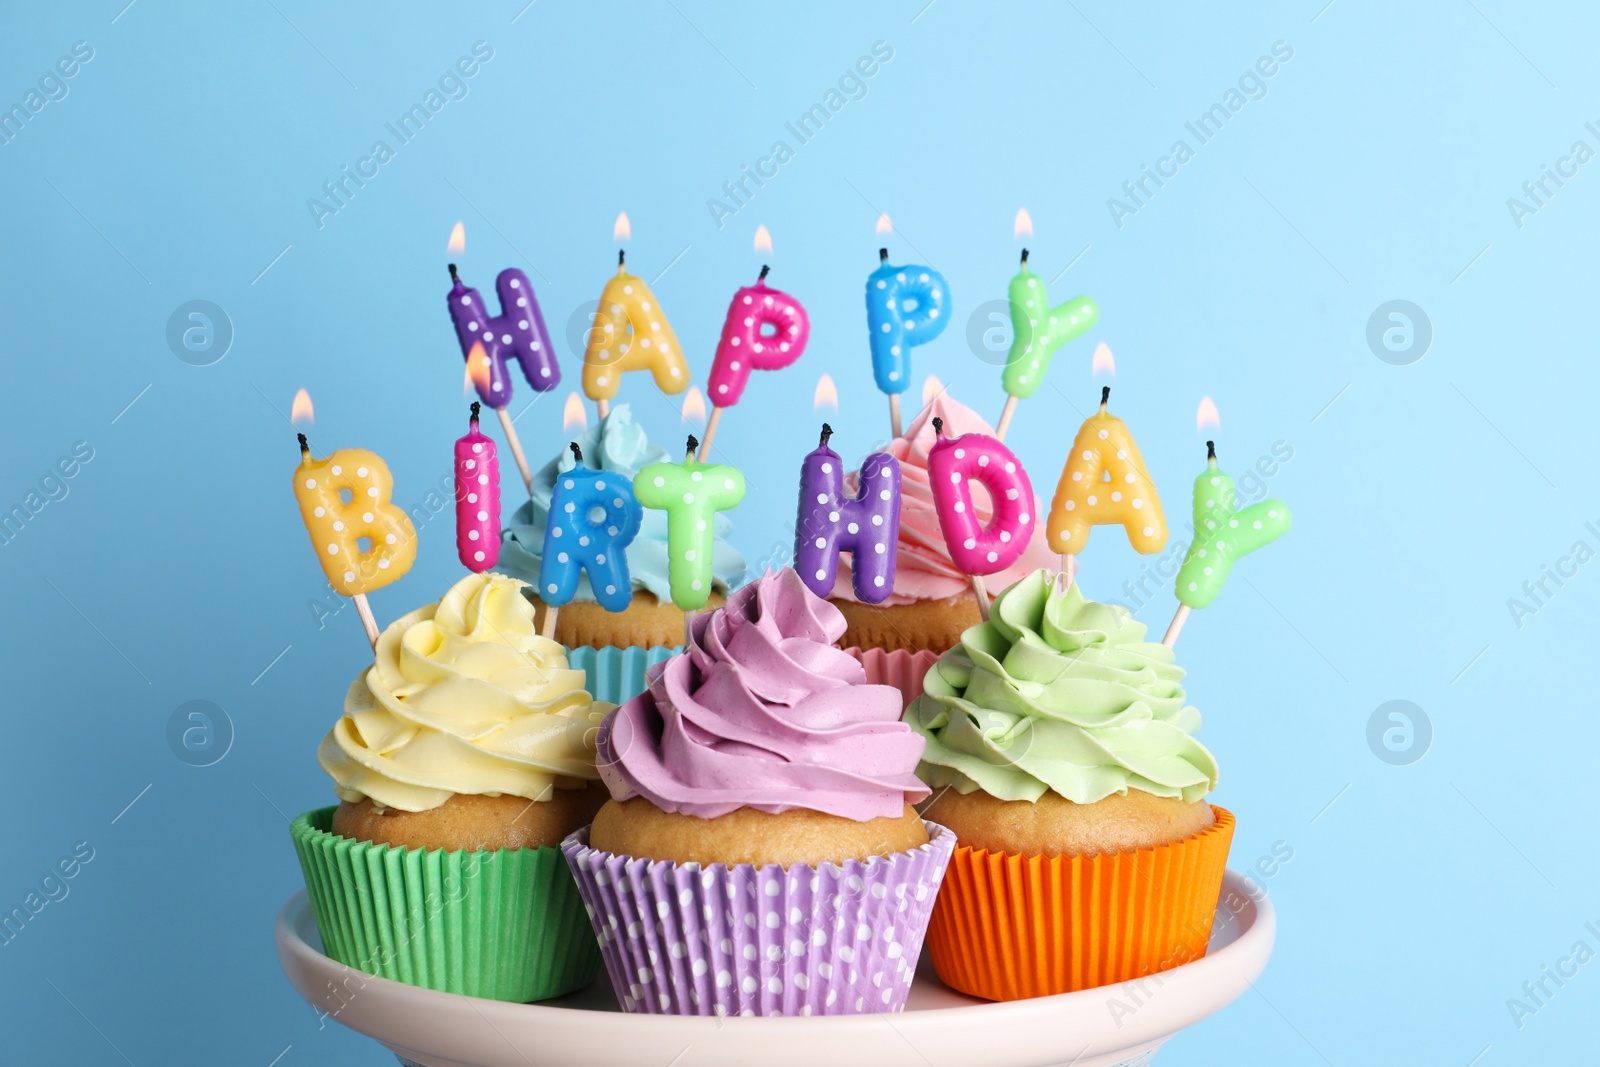 Photo of Birthday cupcakes with burning candles on stand against light blue background